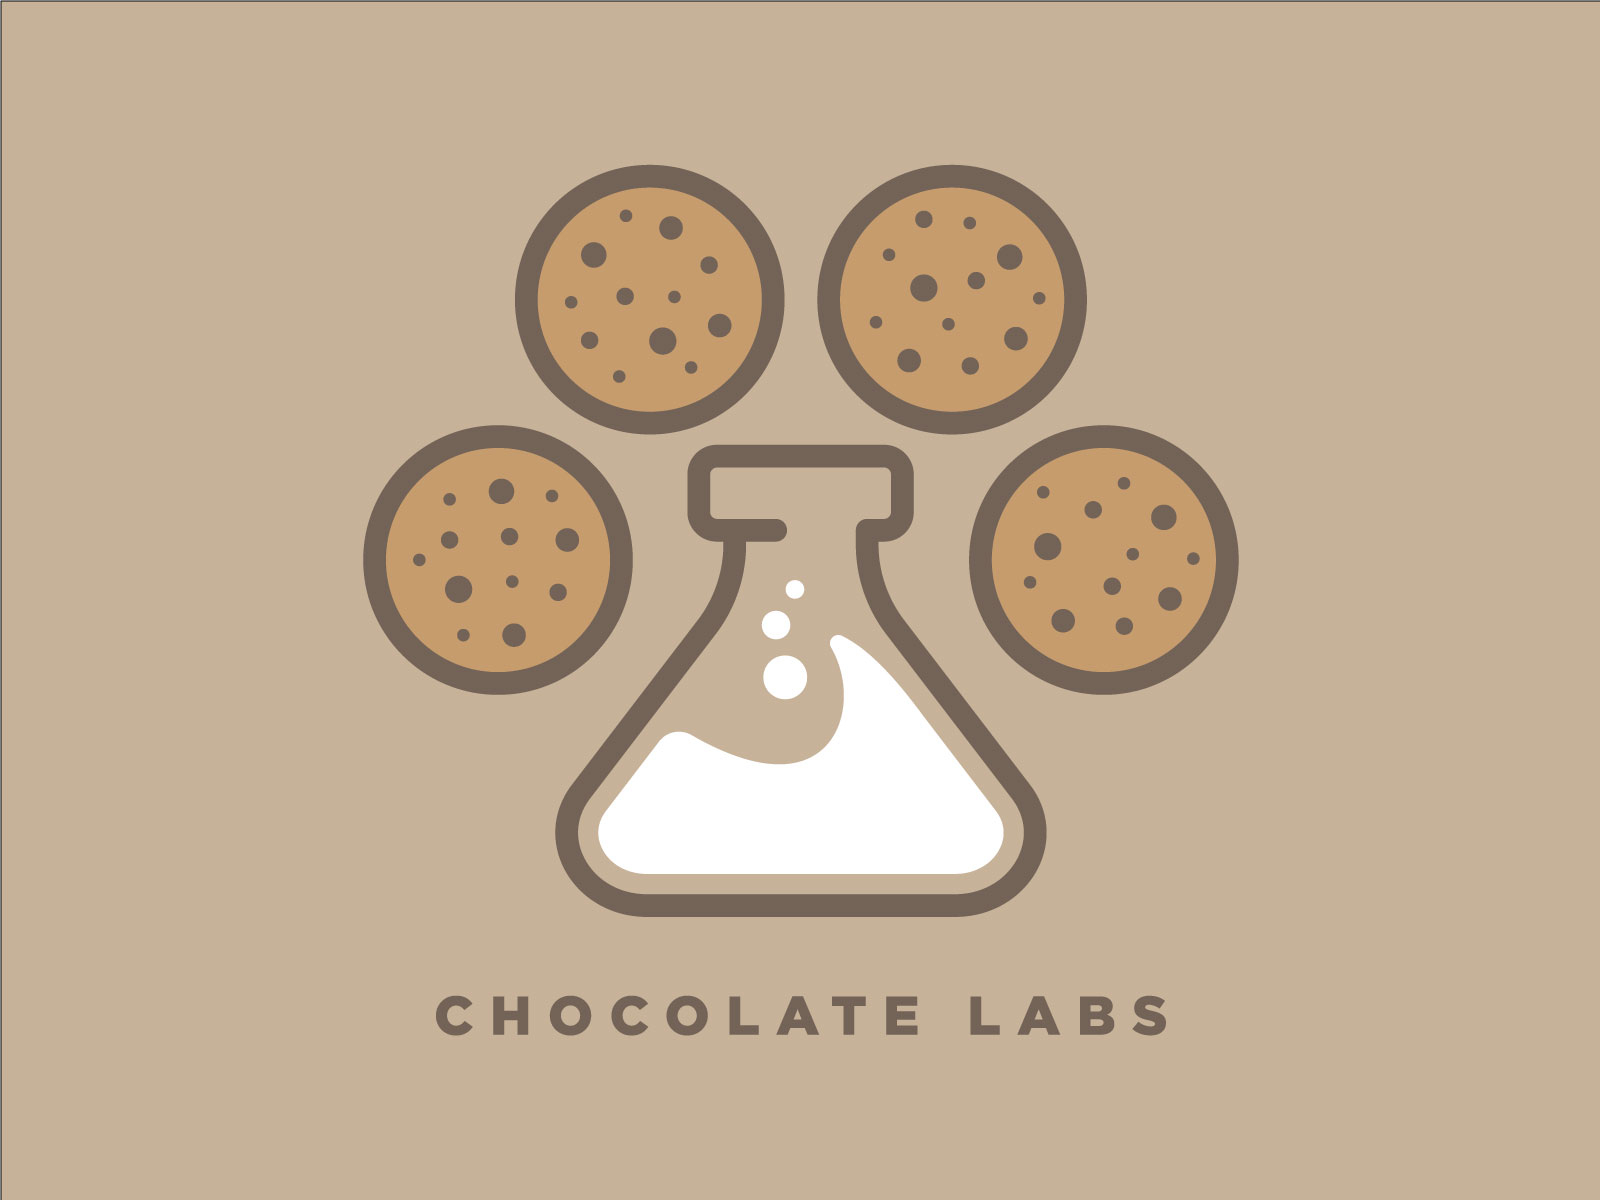 Chocolate Labs by Philip Roth on Dribbble